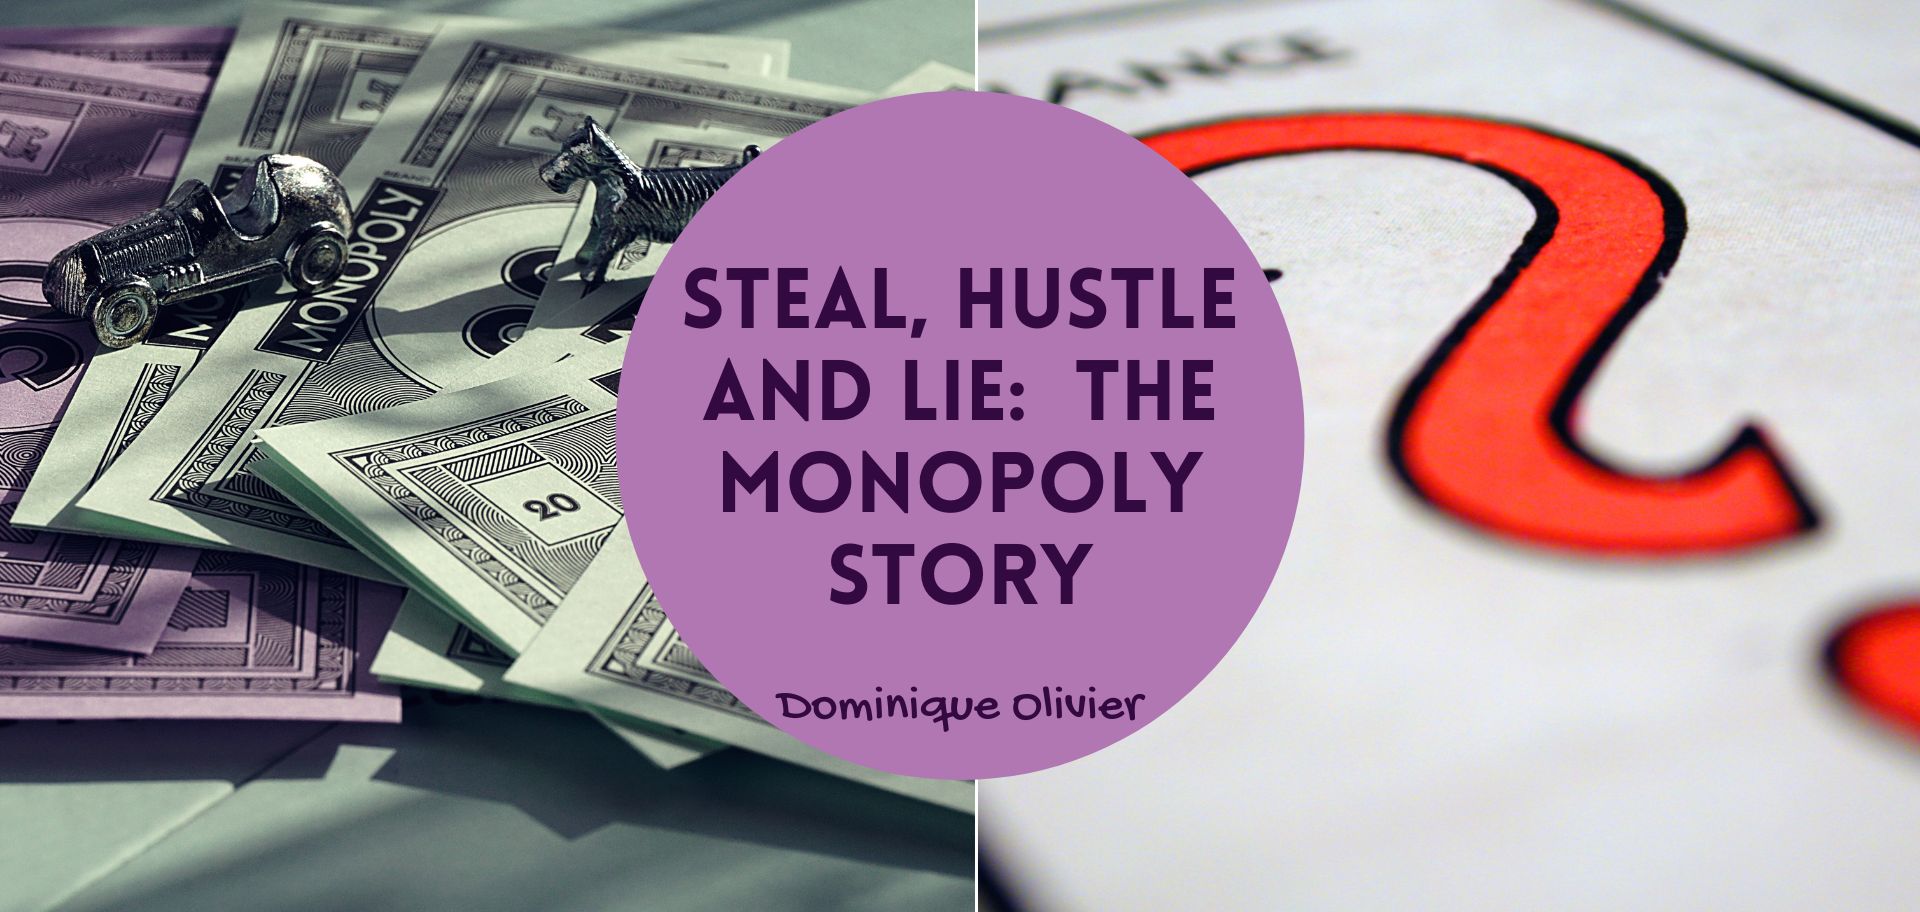 Steal, hustle and lie: the Monopoly story